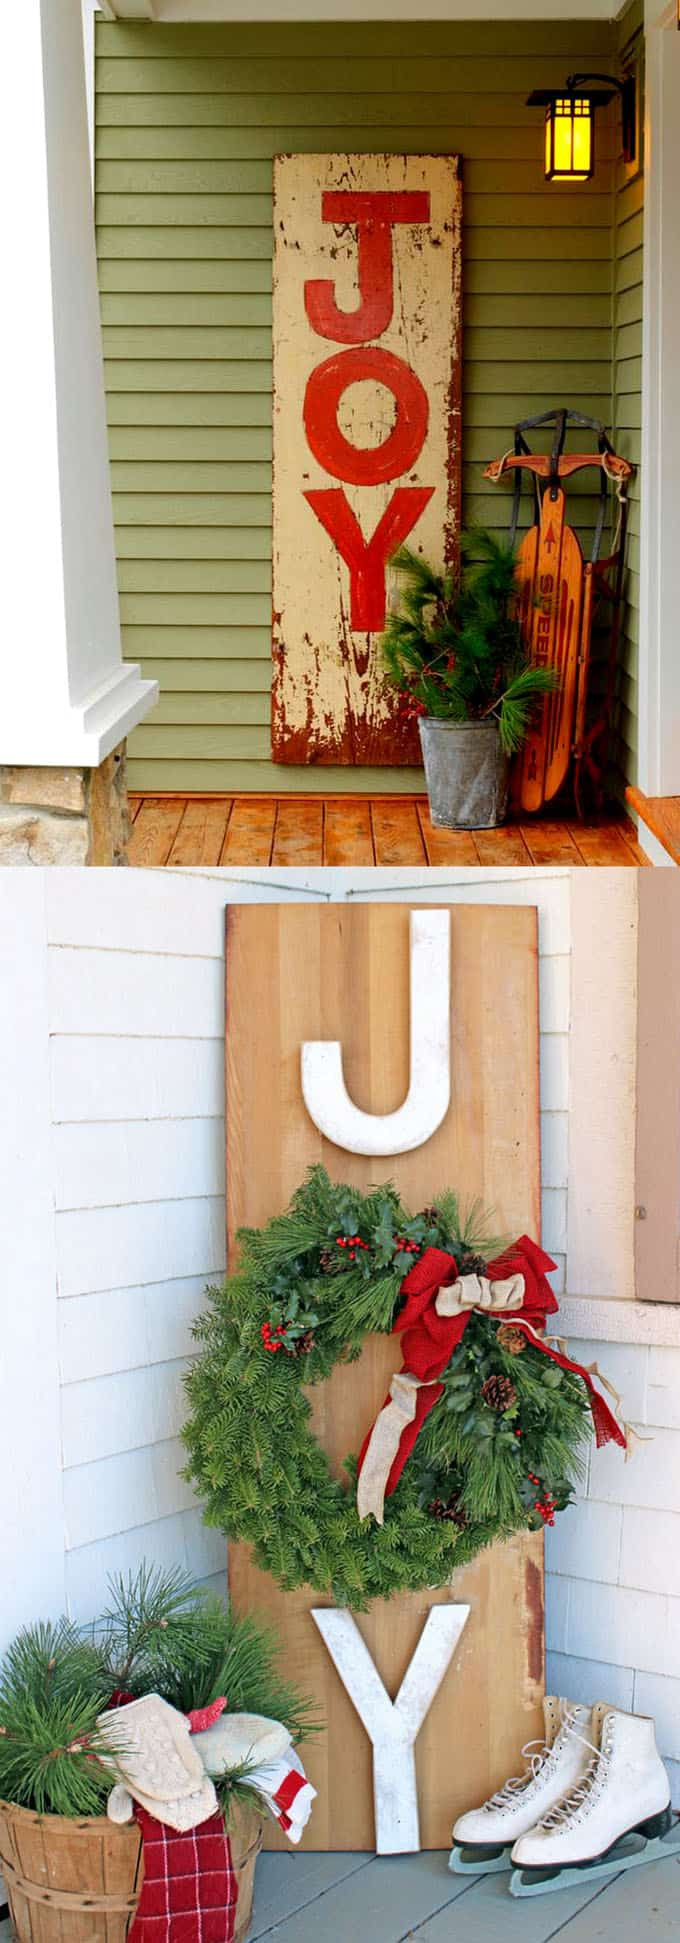 Diy Outdoor Christmas Decorations
 Gorgeous Outdoor Christmas Decorations 32 Best Ideas